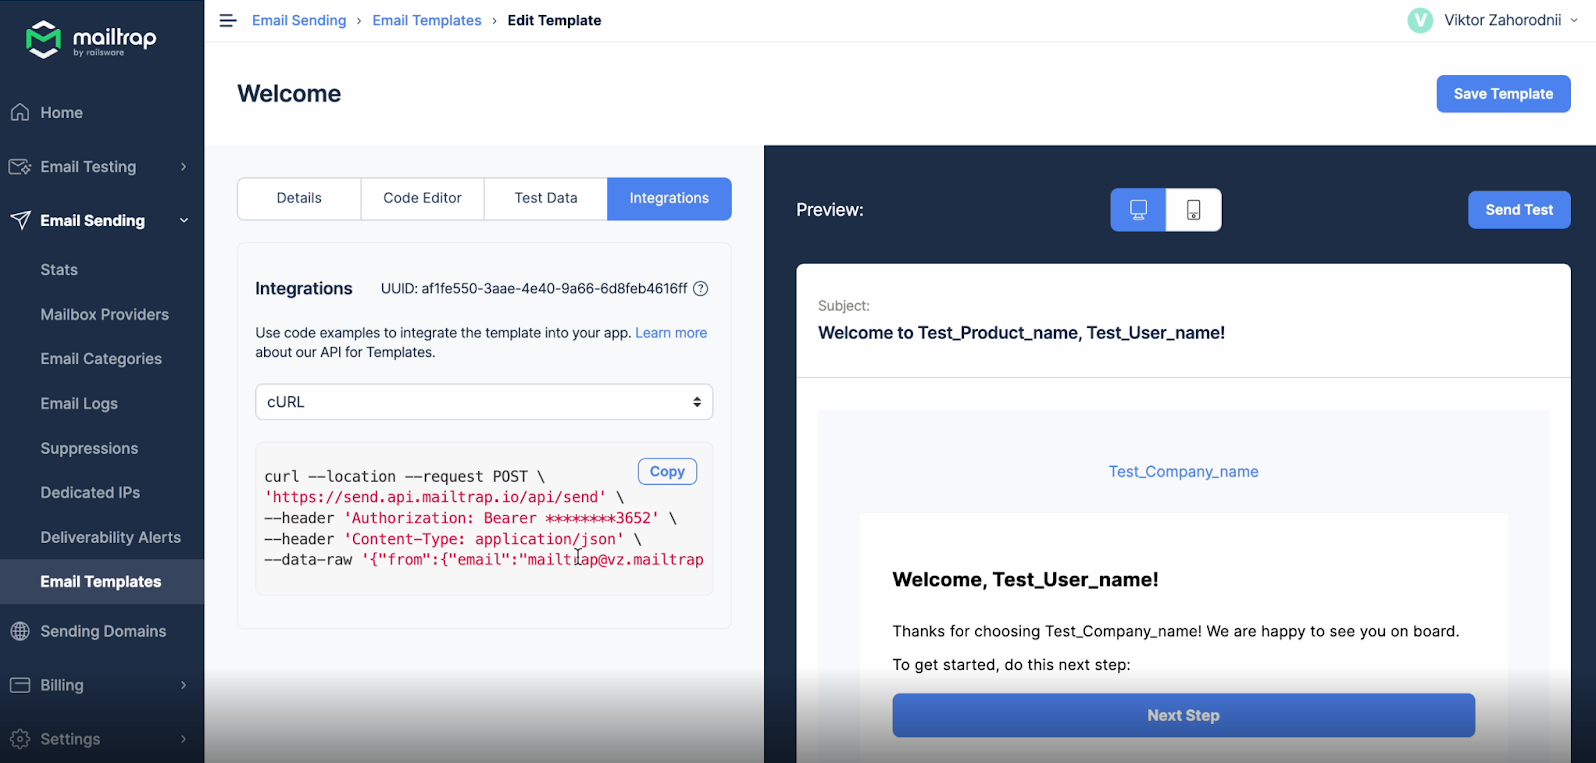 Mailtrap Email Templates feature